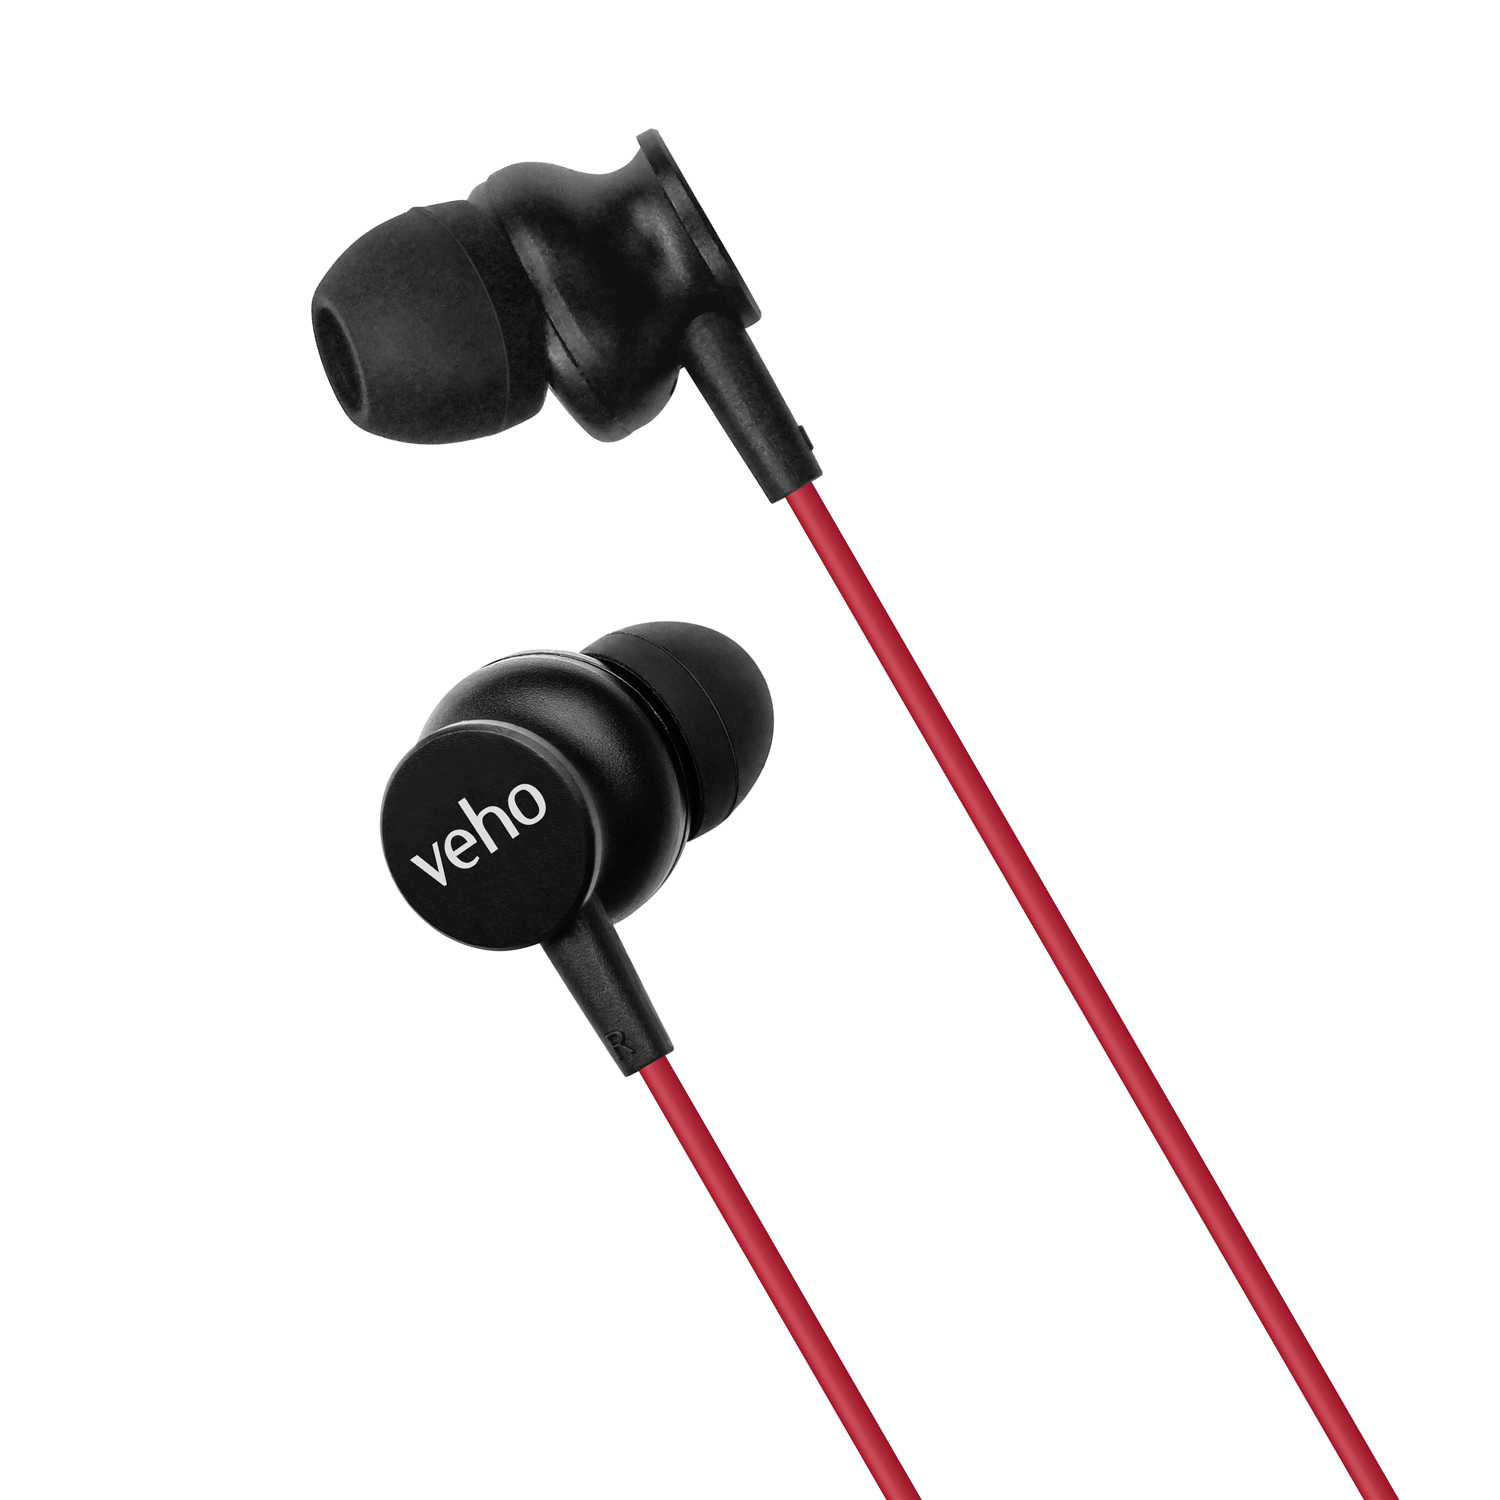 Veho Z-3 In-Ear Stereo Headphones with Built-in Microphone and Remote Control  Red (VEP-105-Z3-R)